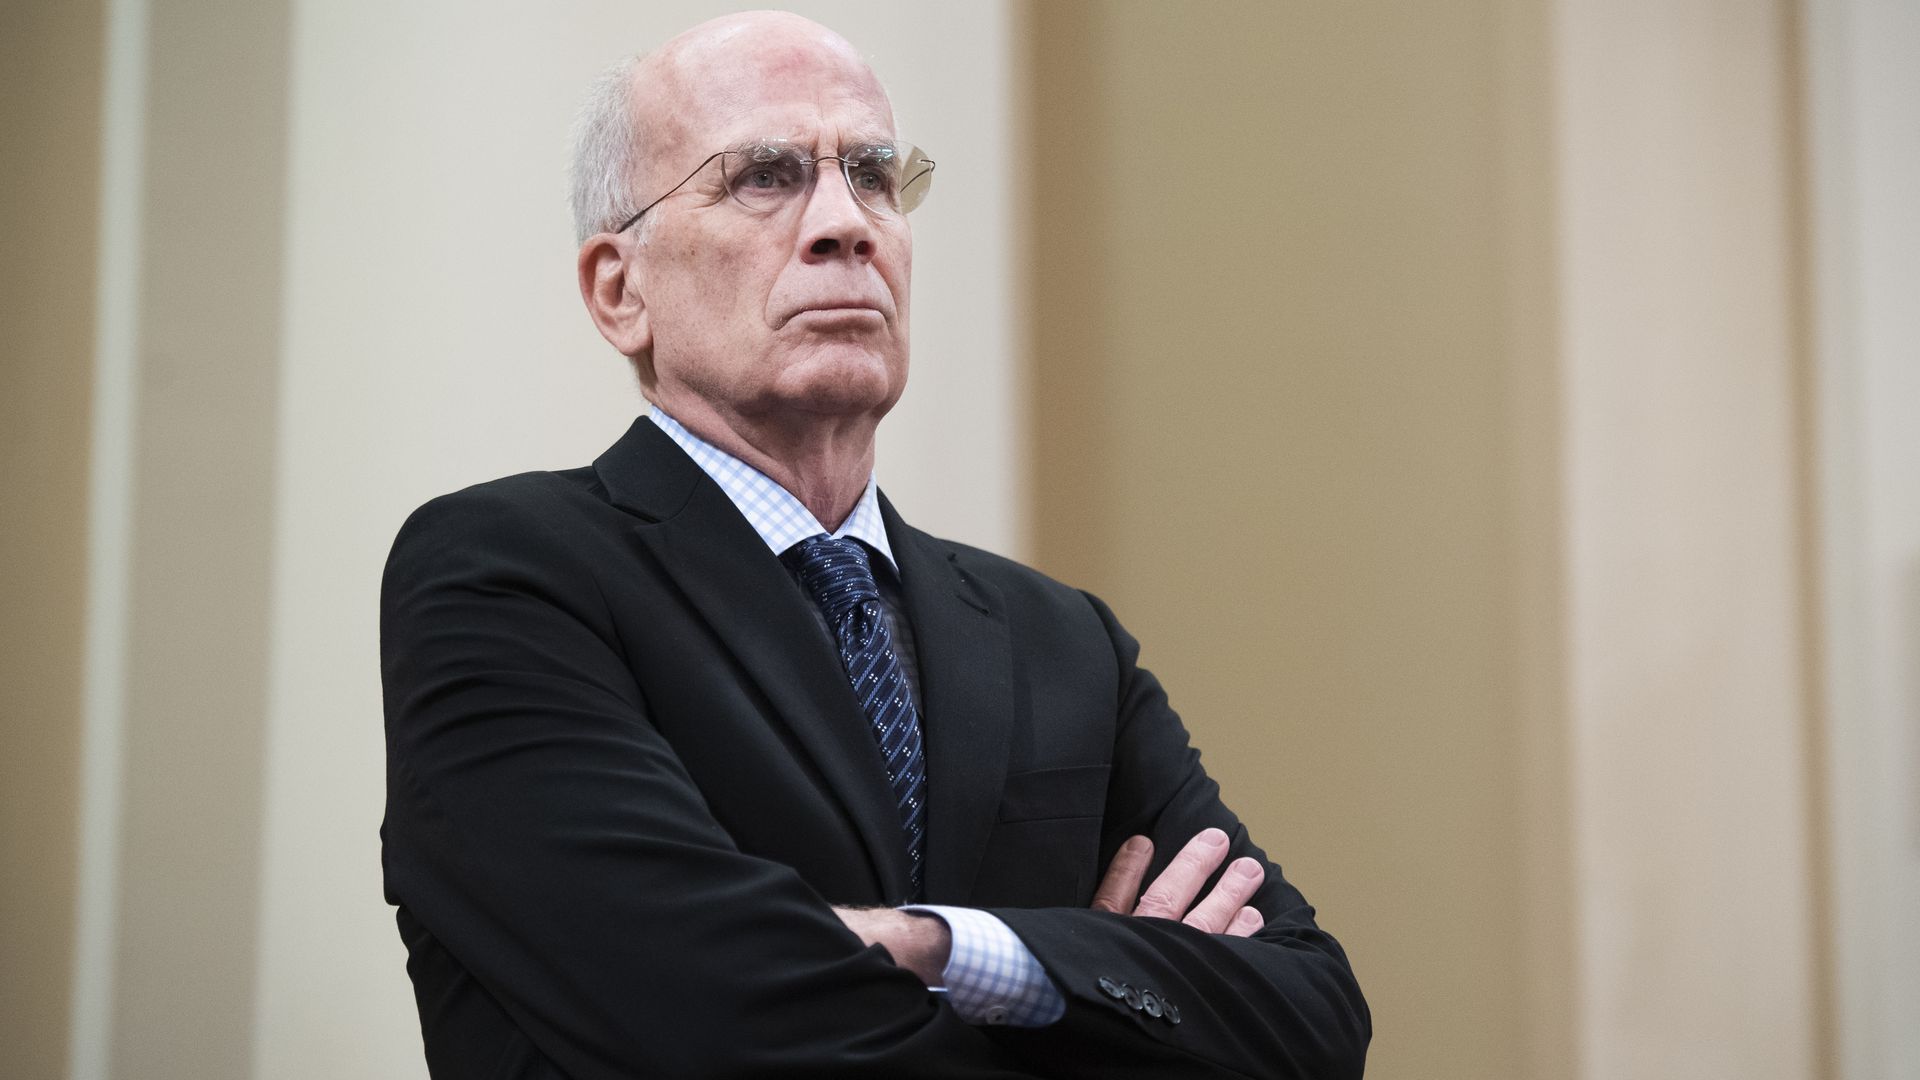 Rep. Peter Welch is seen standing, with his arms crossed.